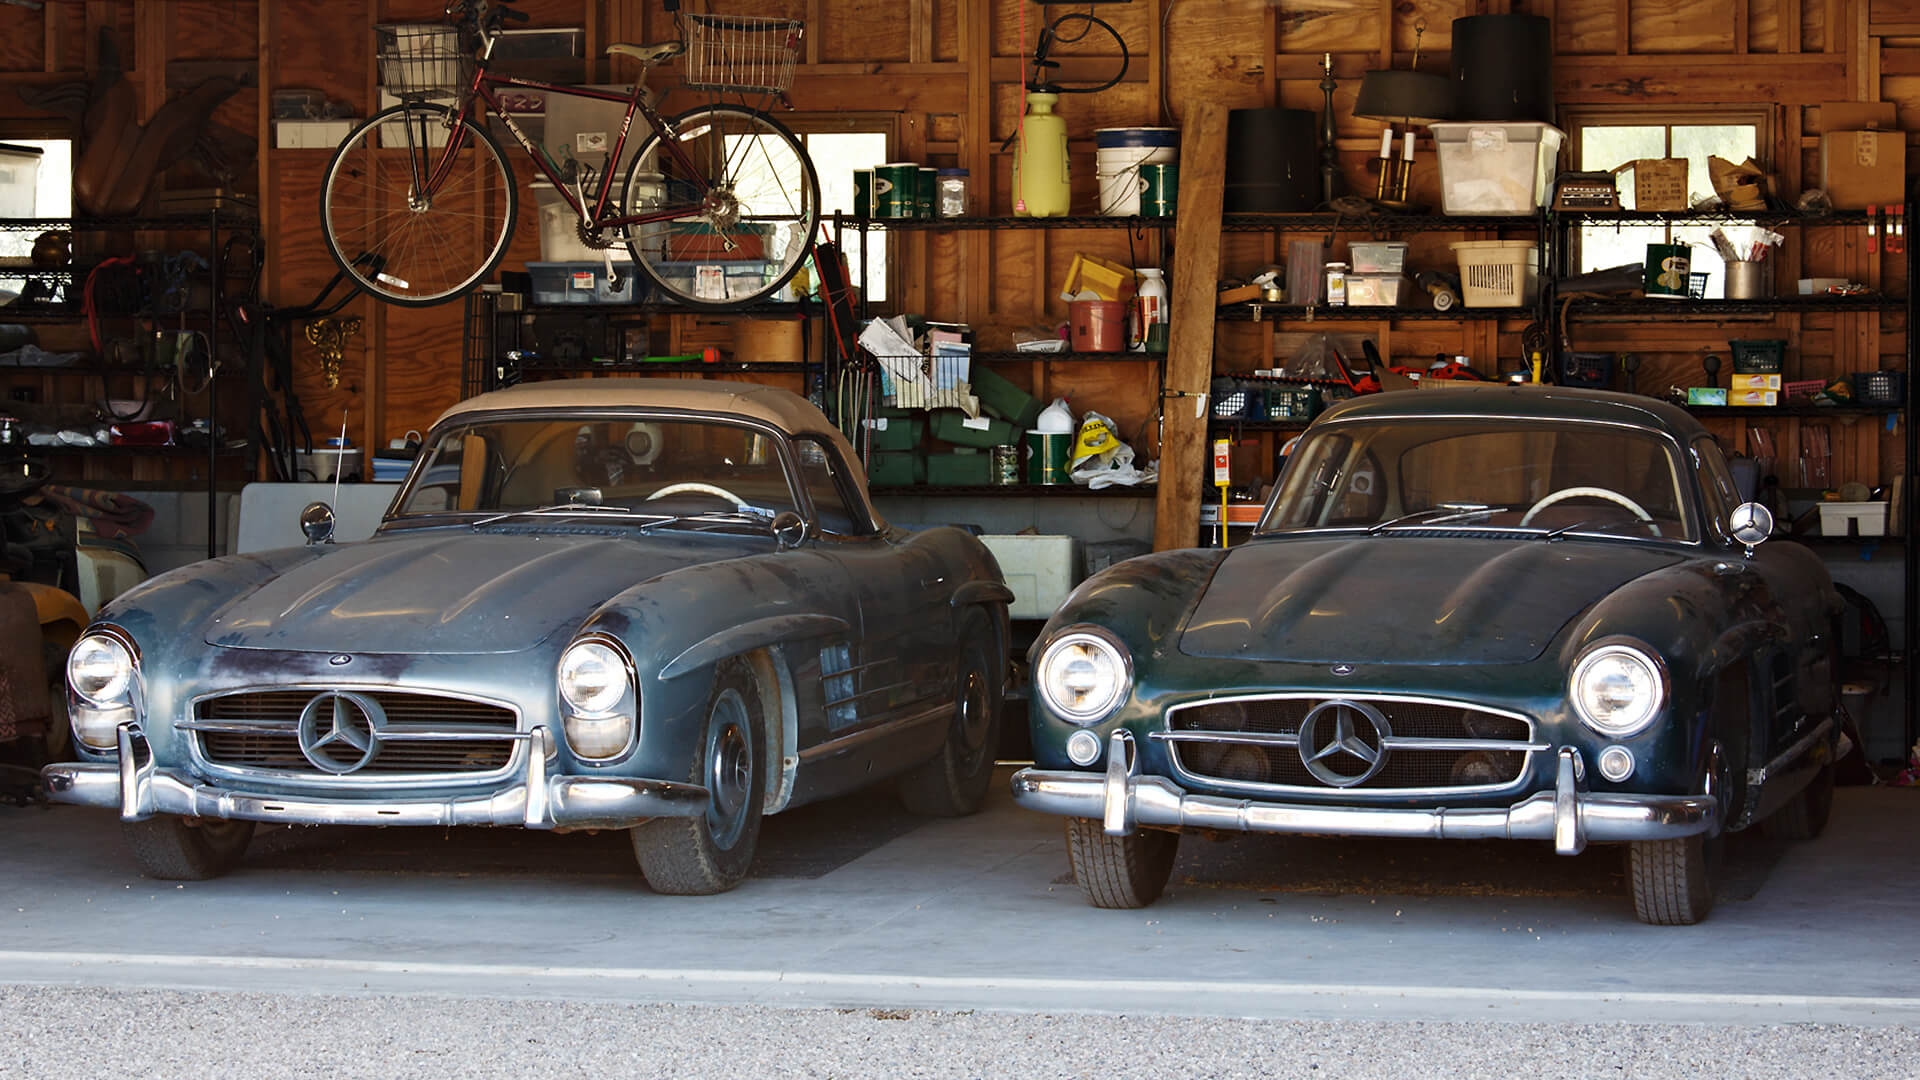 Gooding to offer ‘Holy Grail’ pair of Mercedes 300 SLs at Pebble Beach